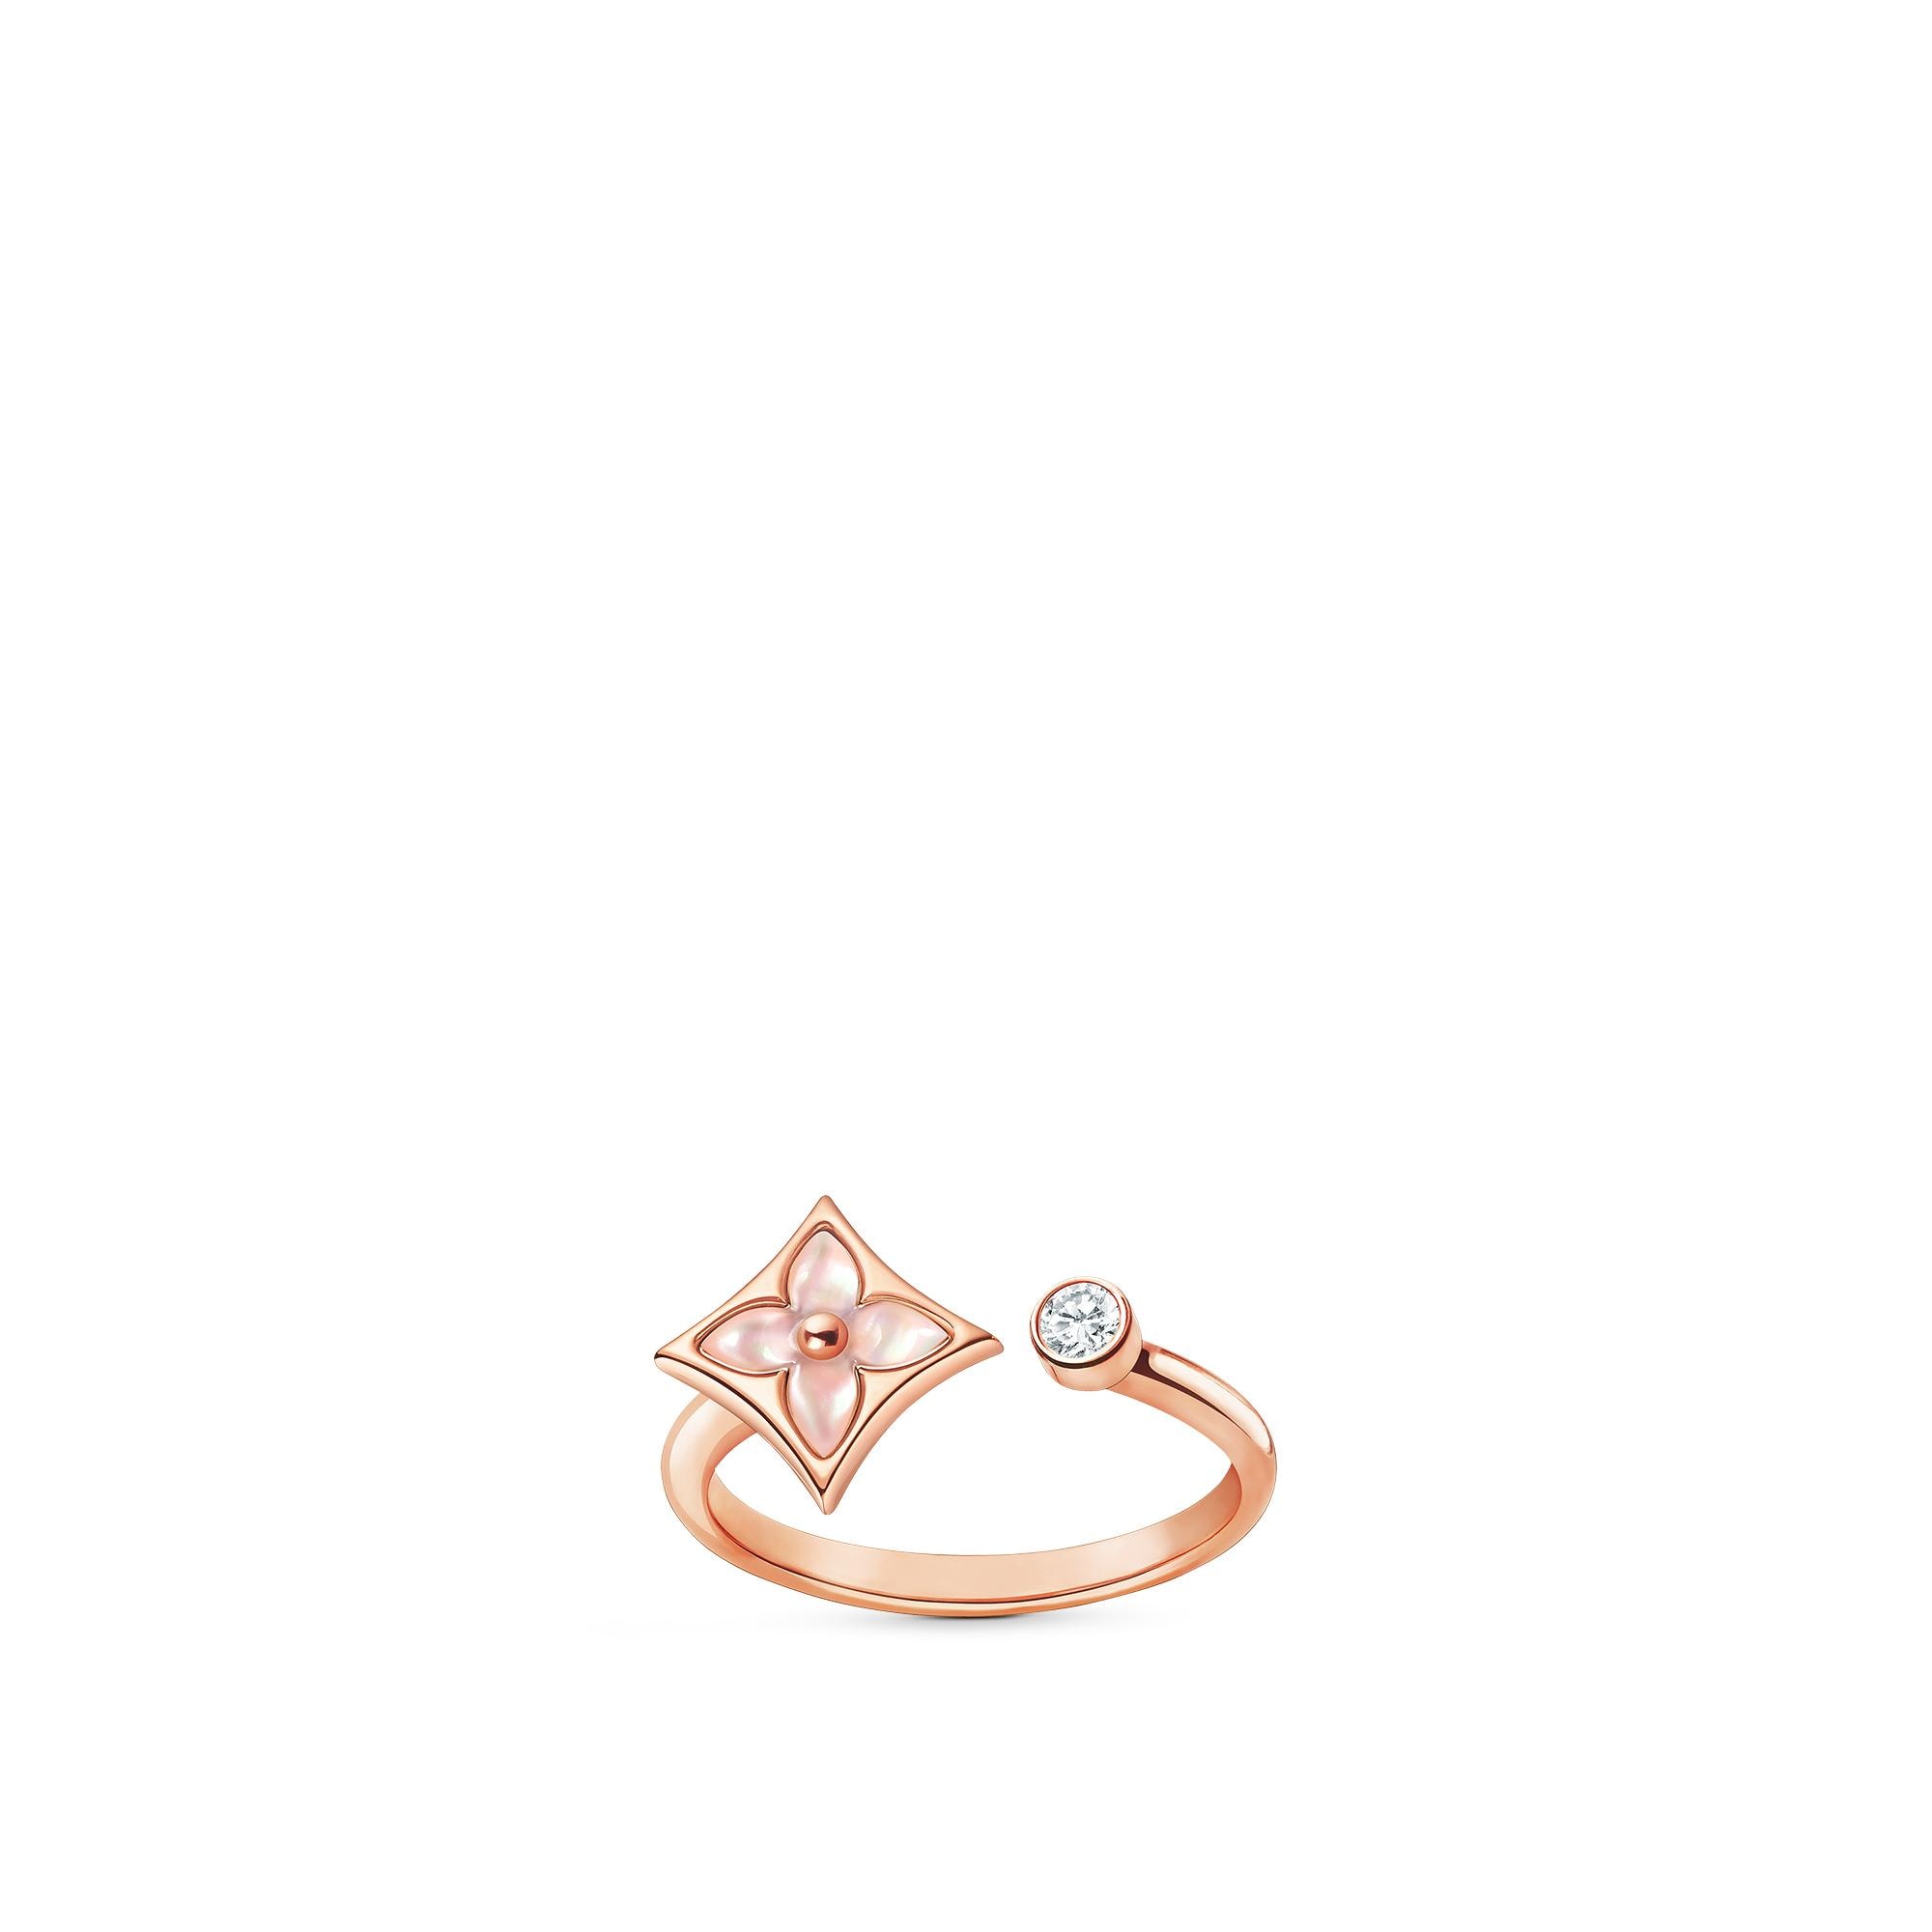 Louis Vuitton Color Blossom Mini Star Ring, Pink Gold, Pink Mother-Of-Pearl And Diamond – Jewelry – Categories Q9N07F